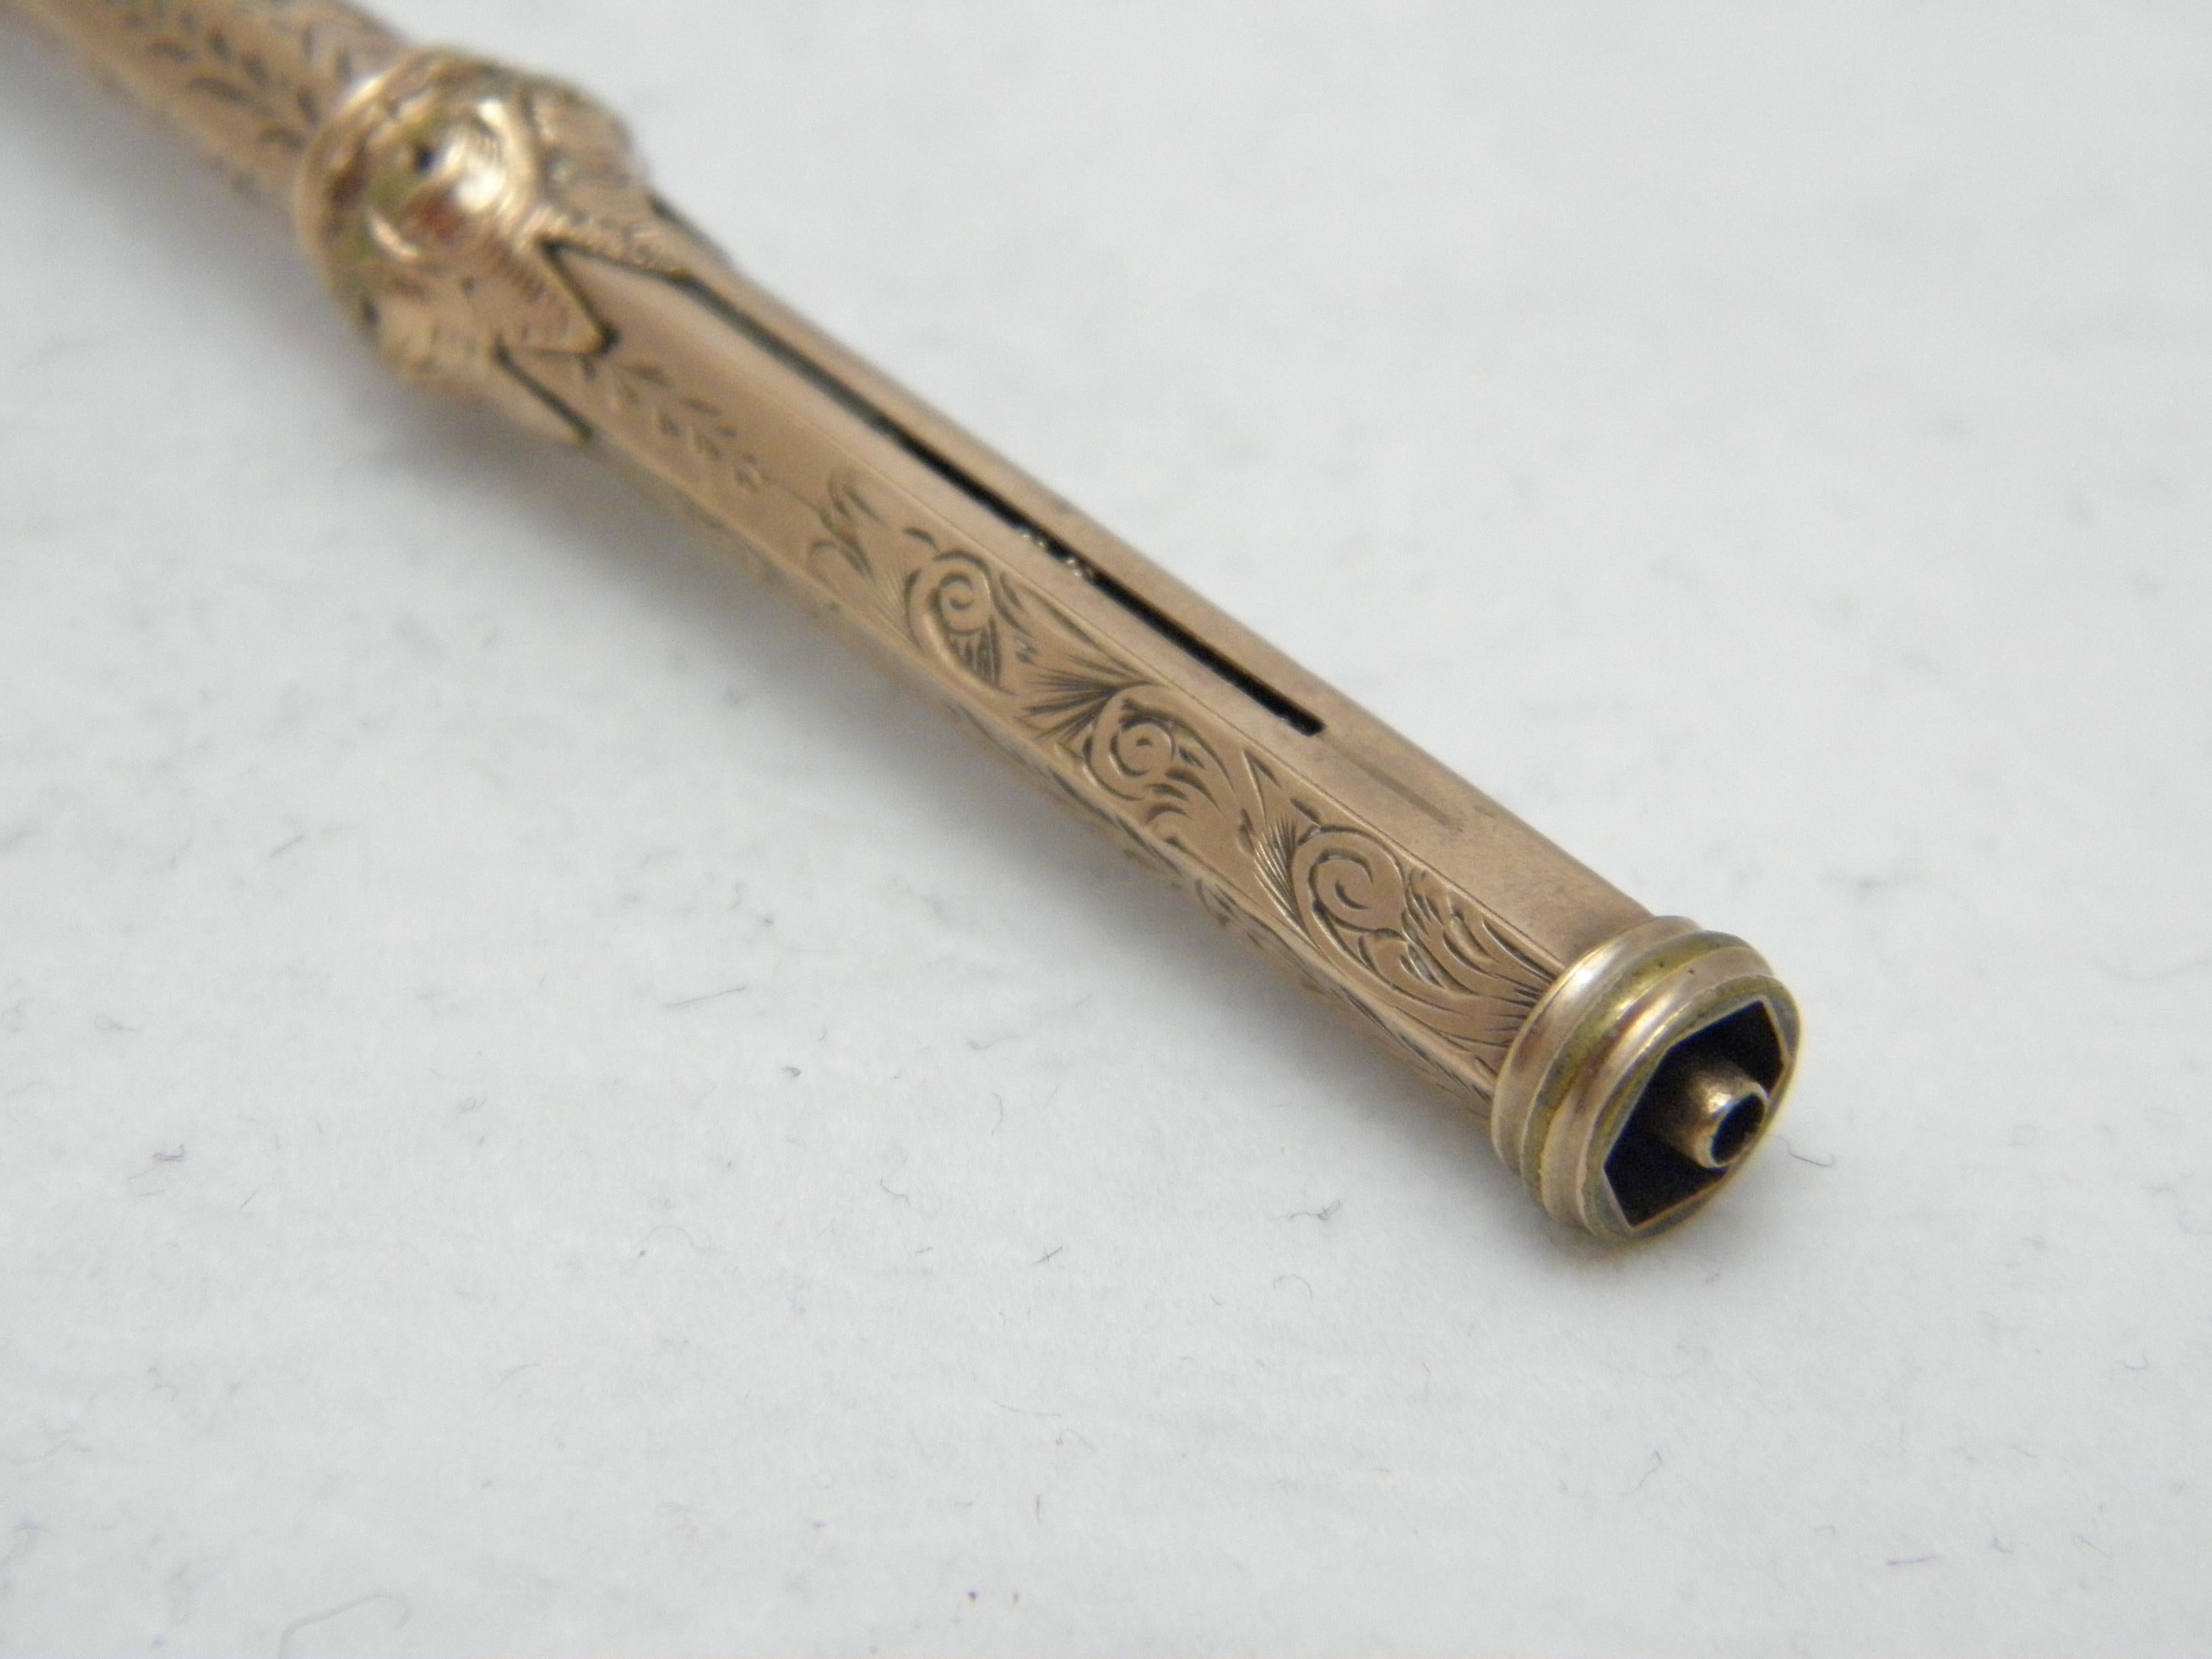 Victorian Bargain Antique 9ct Rose Gold Propelling Pencil 1860 375 Purity Huge Heavy 14.4g For Sale